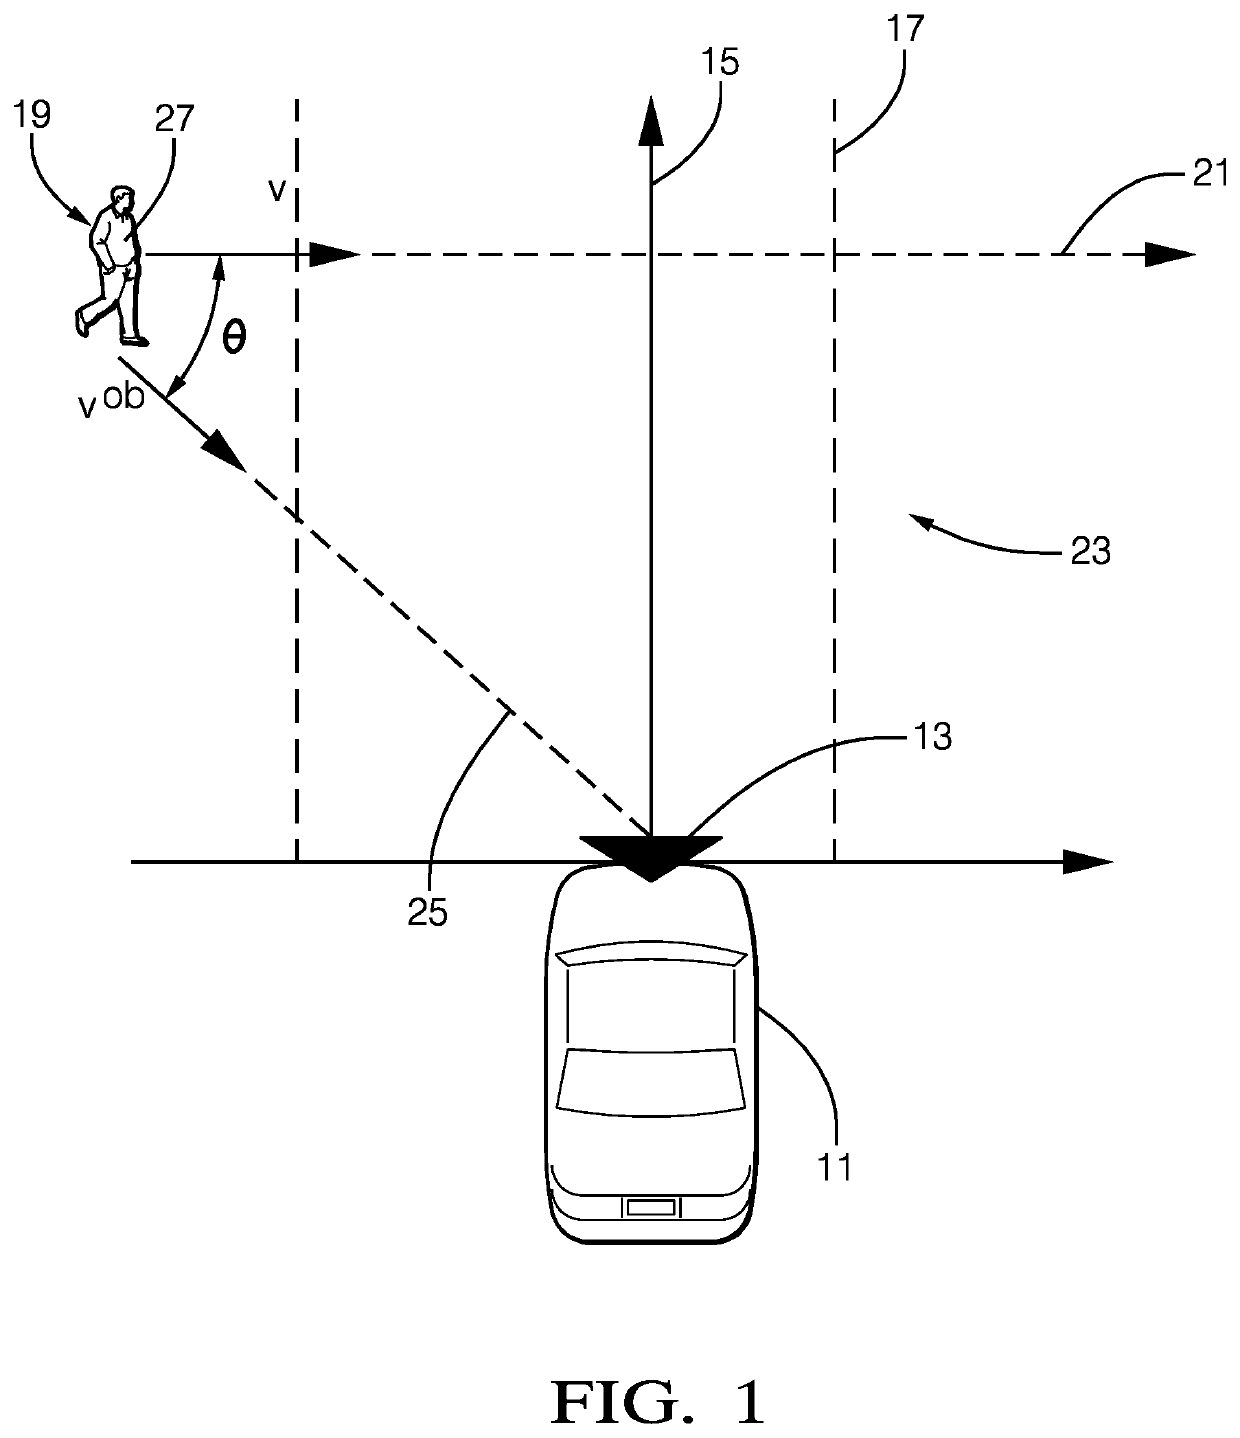 Method for the recognition of a moving pedestrian